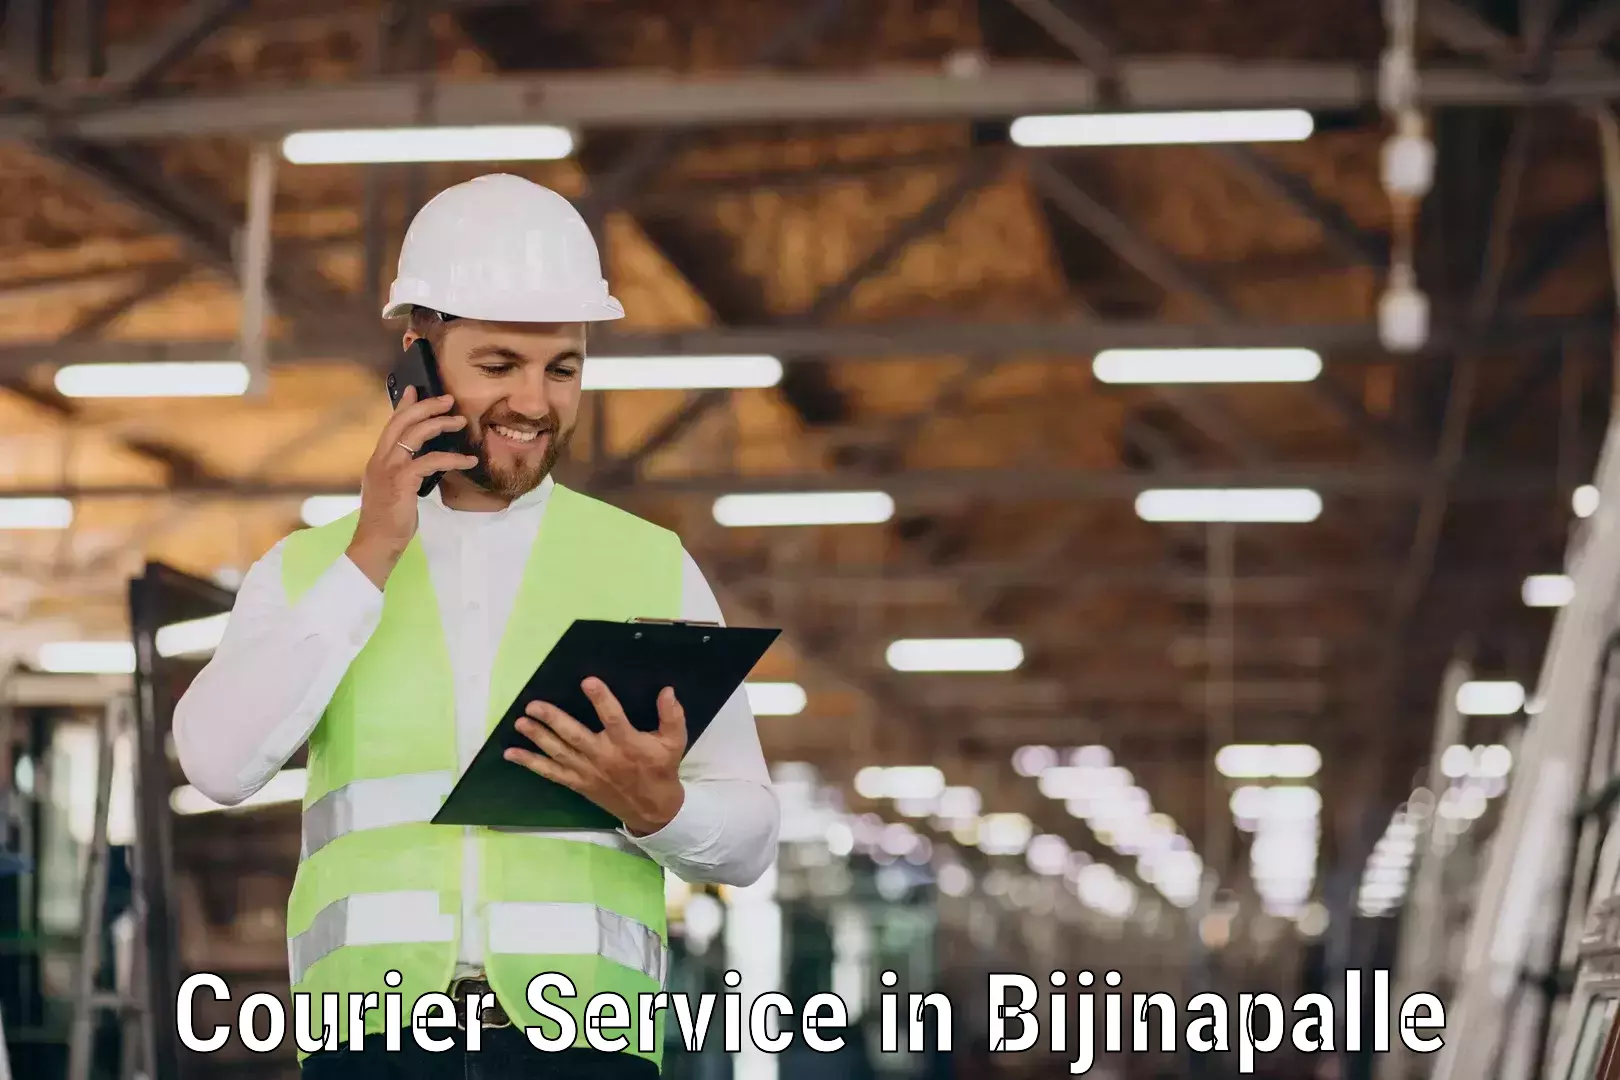 Integrated shipping systems in Bijinapalle